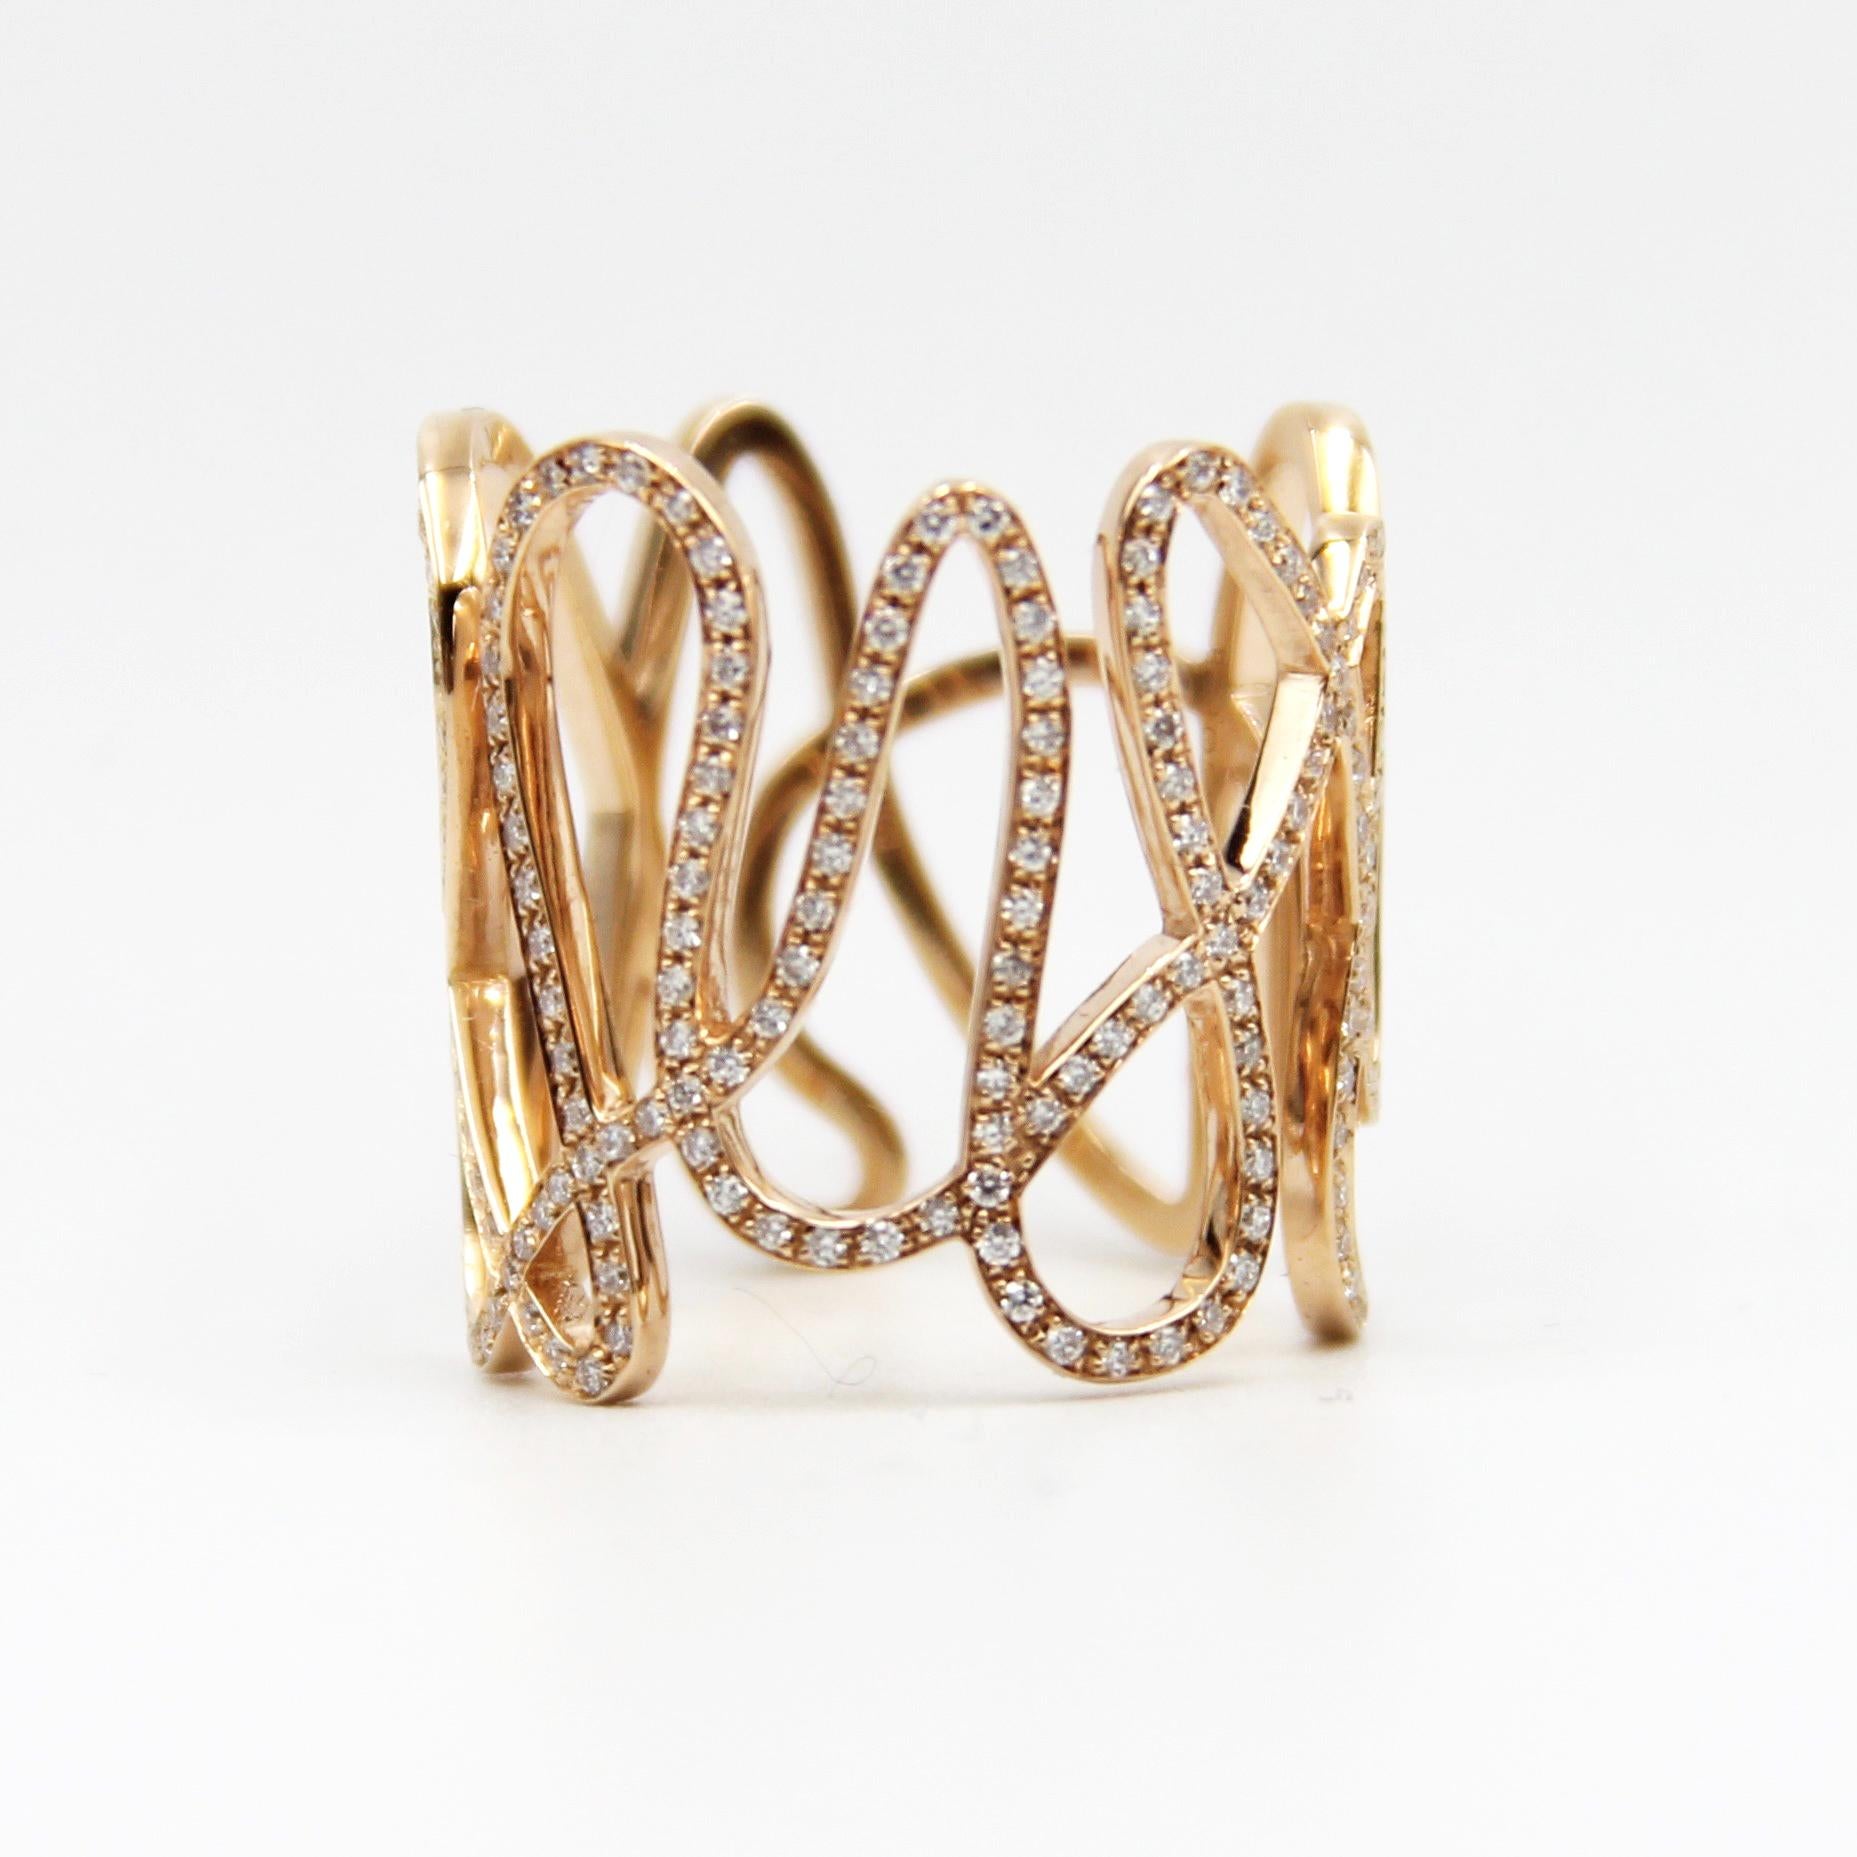 Repossi's perfect 18k pink gold woven ring with brilliant cut diamonds. Marked 2829AL , 750 and C14-1054 serial number inside . 